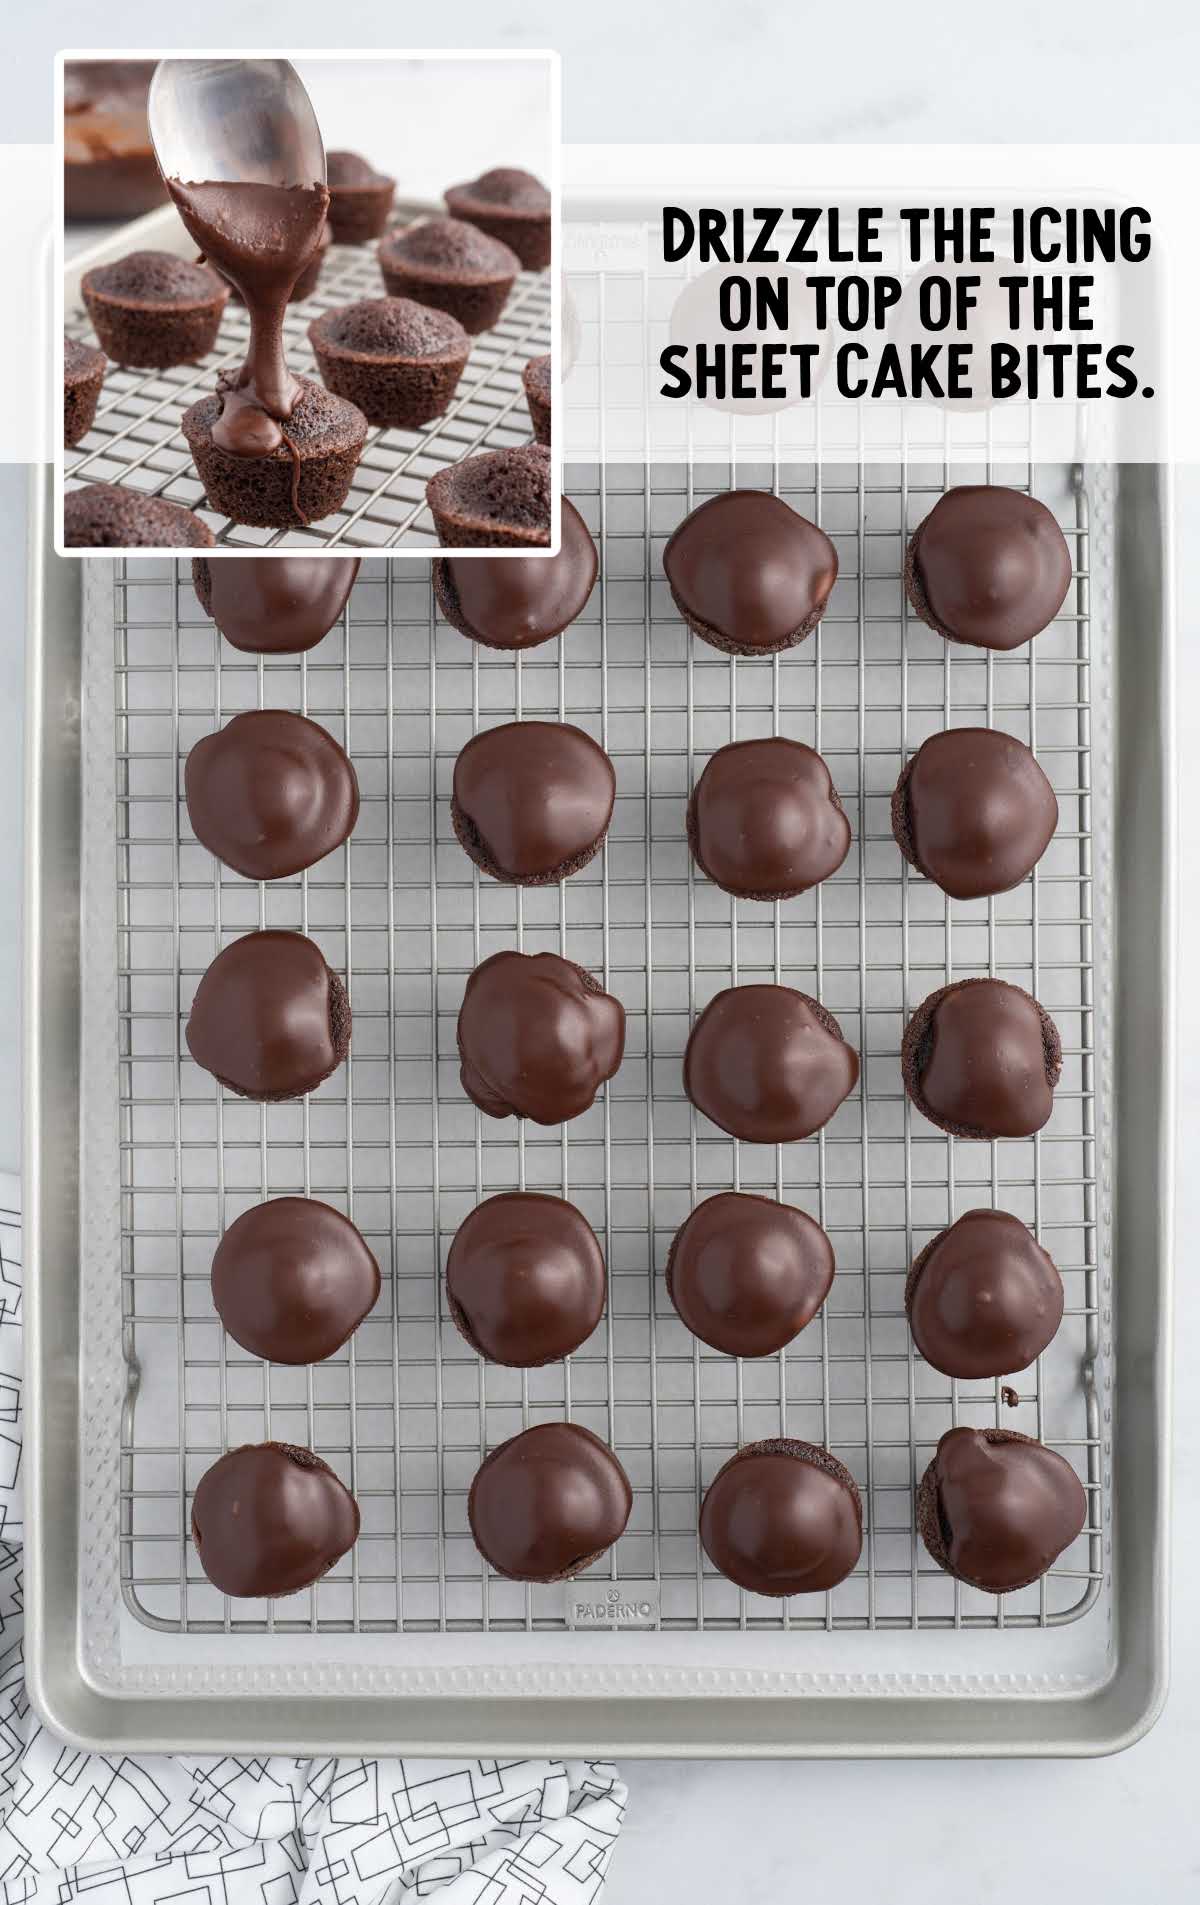 icing drizzled on top of the sheet cake bites on a cooling rack